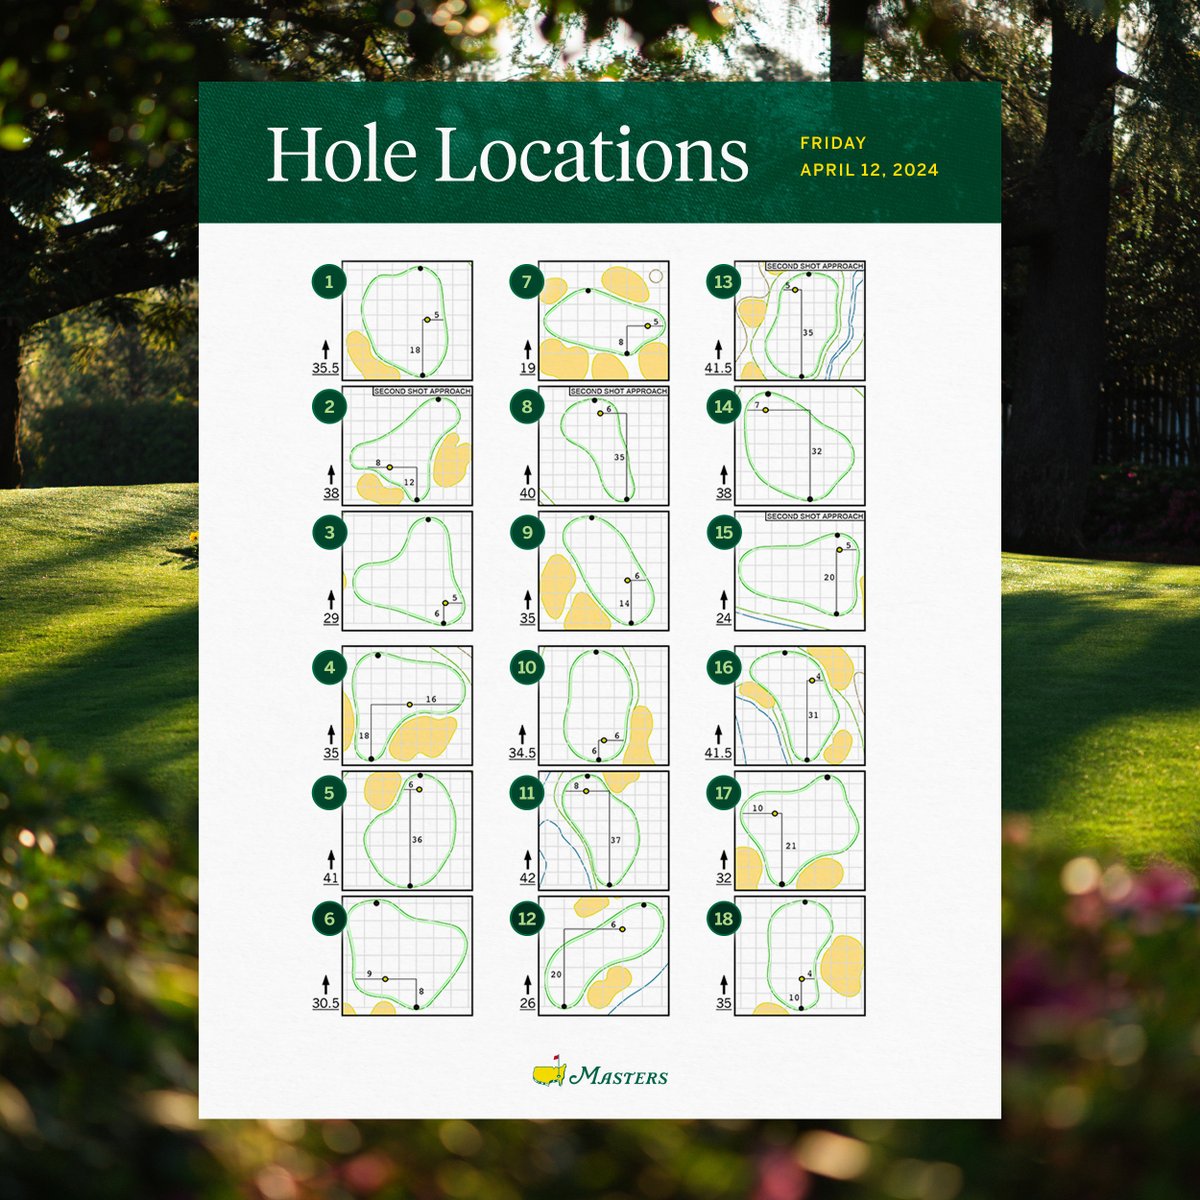 Hole locations for the second round of the Masters Tournament. #themasters